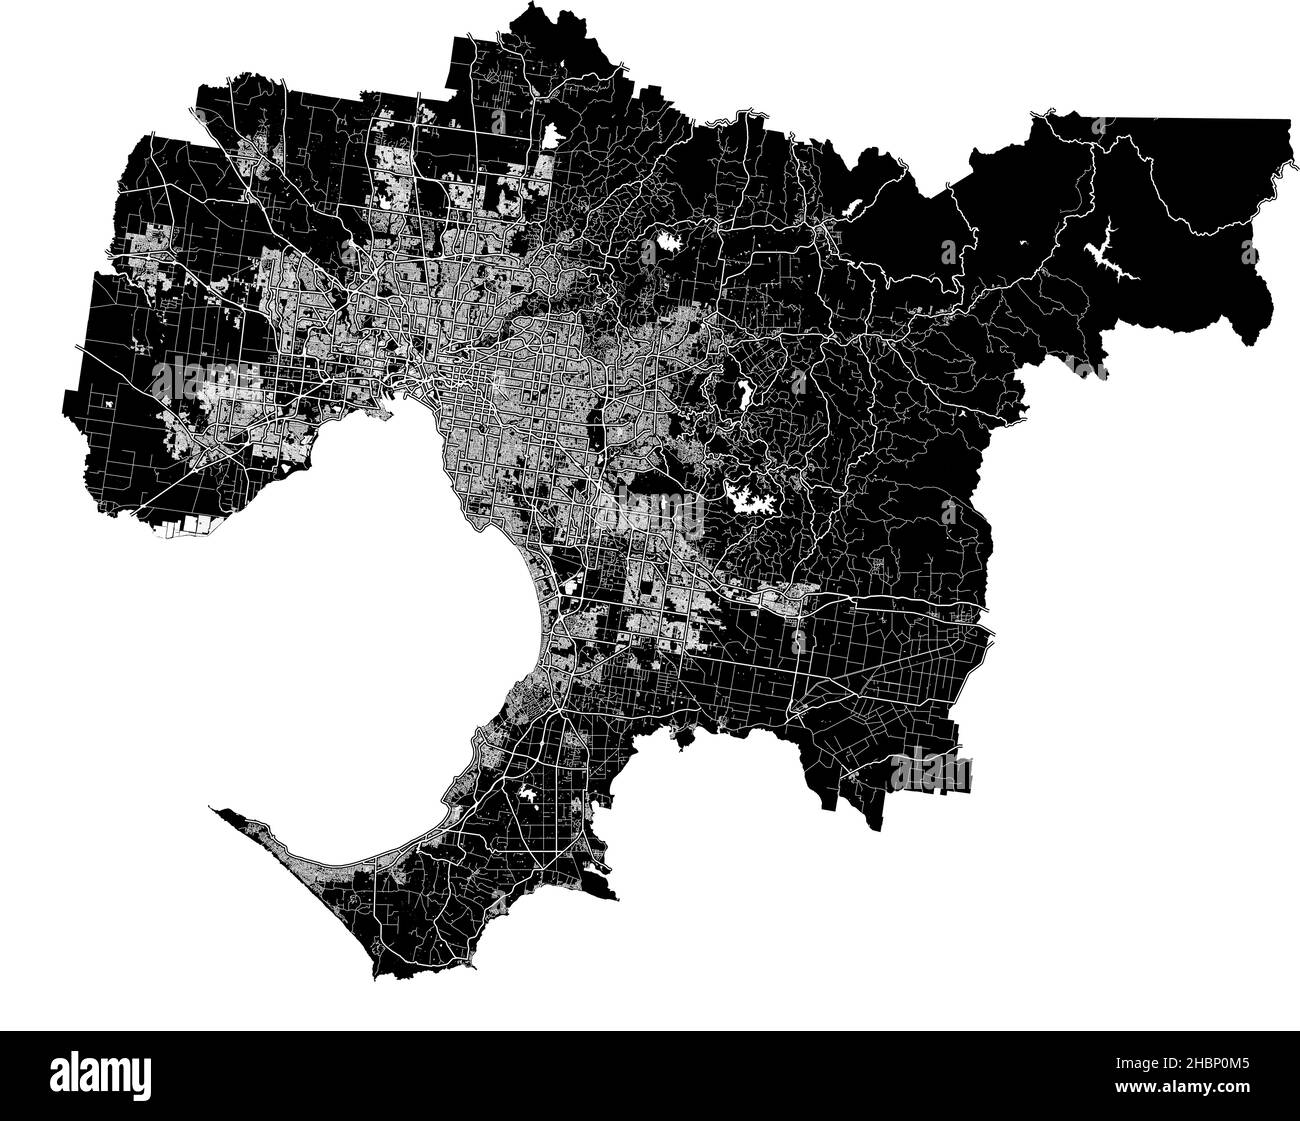 Melbourne, Australia, high resolution vector map with city boundaries, and editable paths. The city map was drawn with white areas and lines for main Stock Vector